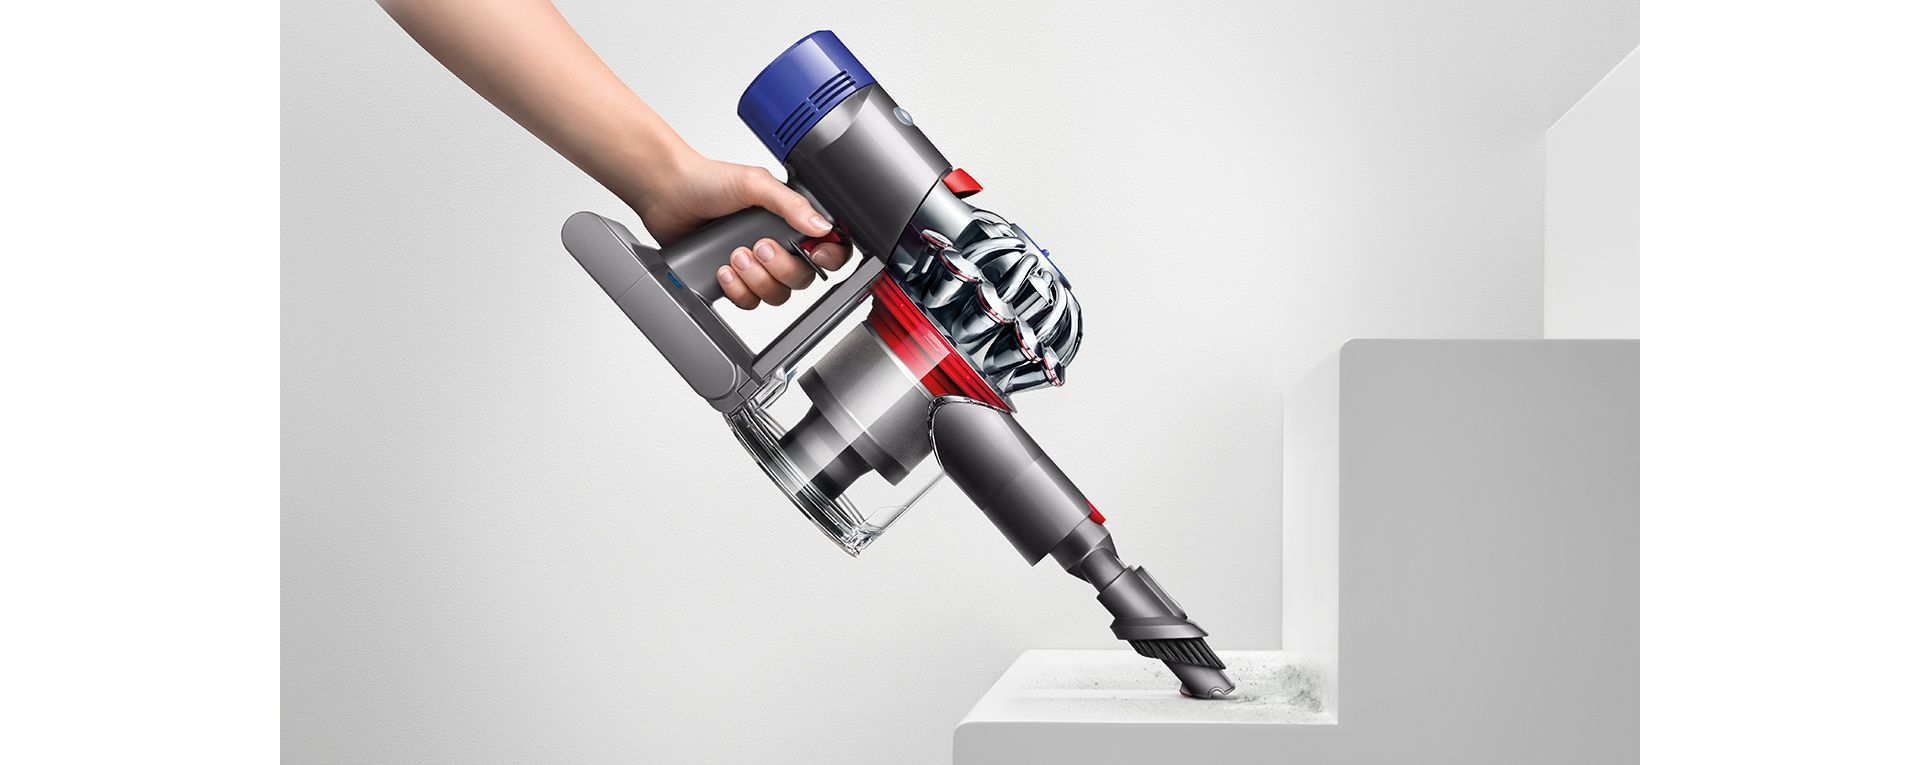 Dyson V8 being used as a handheld 